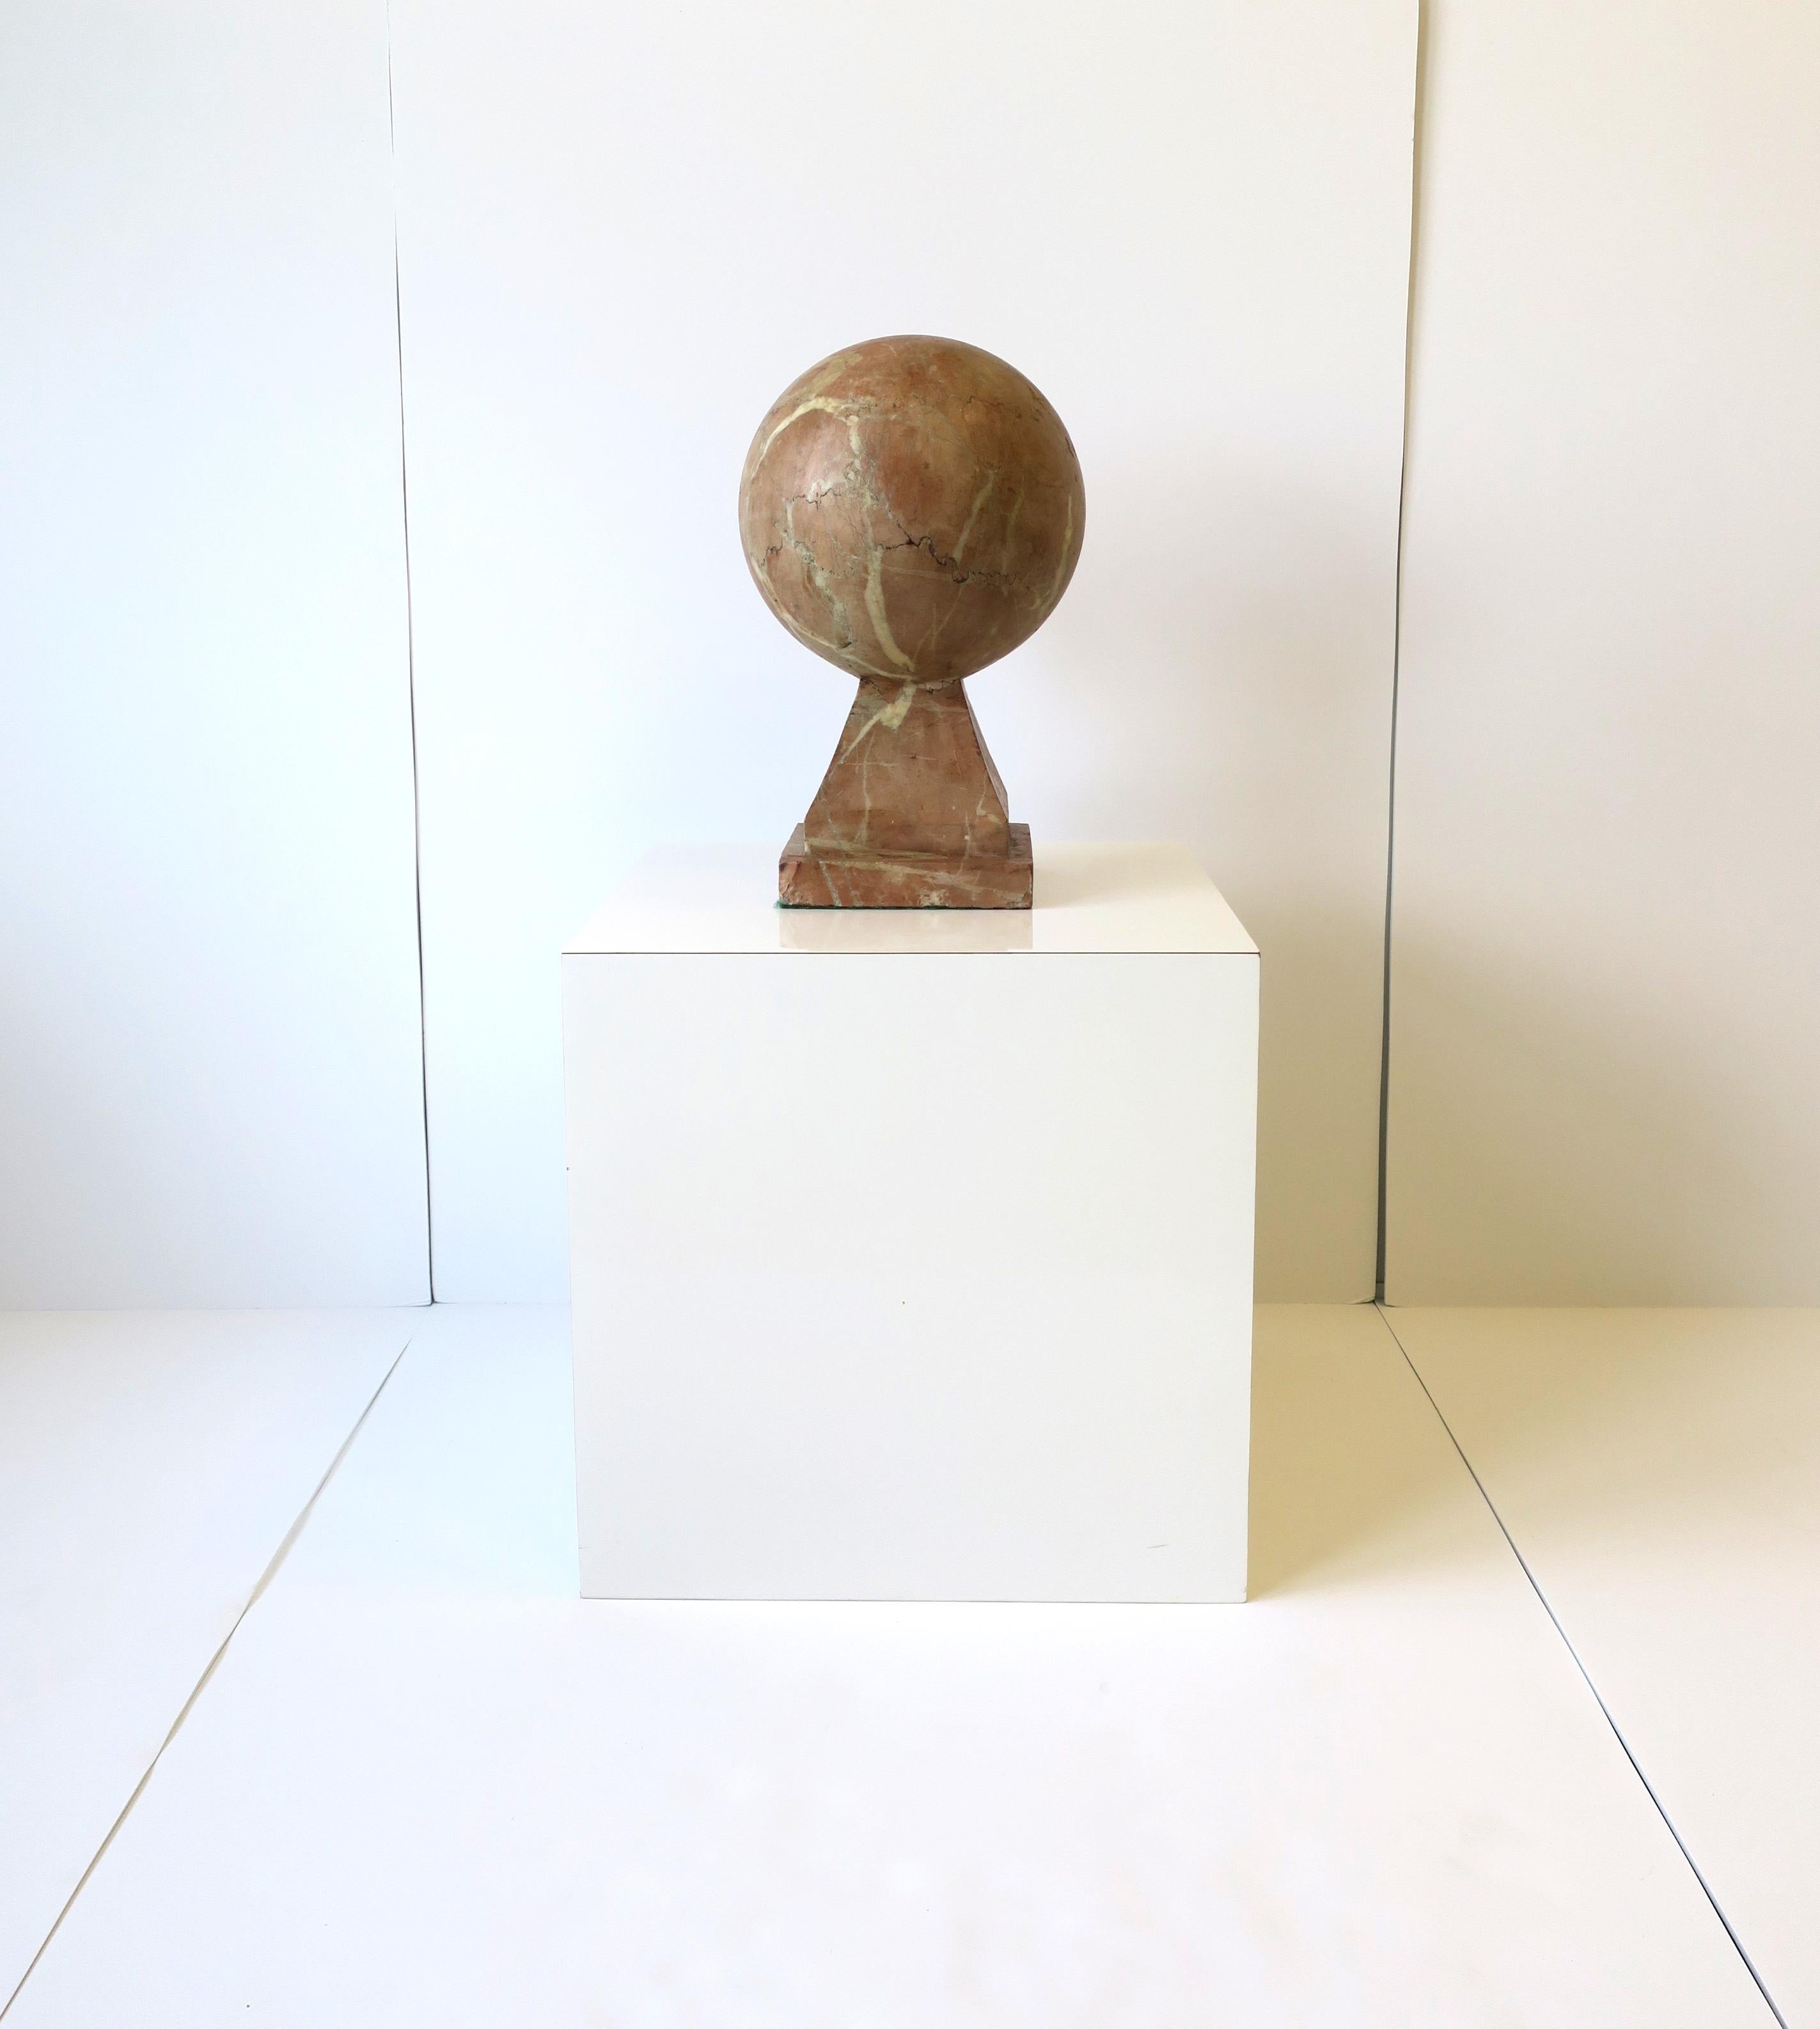 A beautiful and substantial Art Deco Modern marble sphere sculpture, circa early to mid-20th century, Europe. Piece is made from one piece of marble. A great decorative object with scale. 

Dimensions: 
8.25